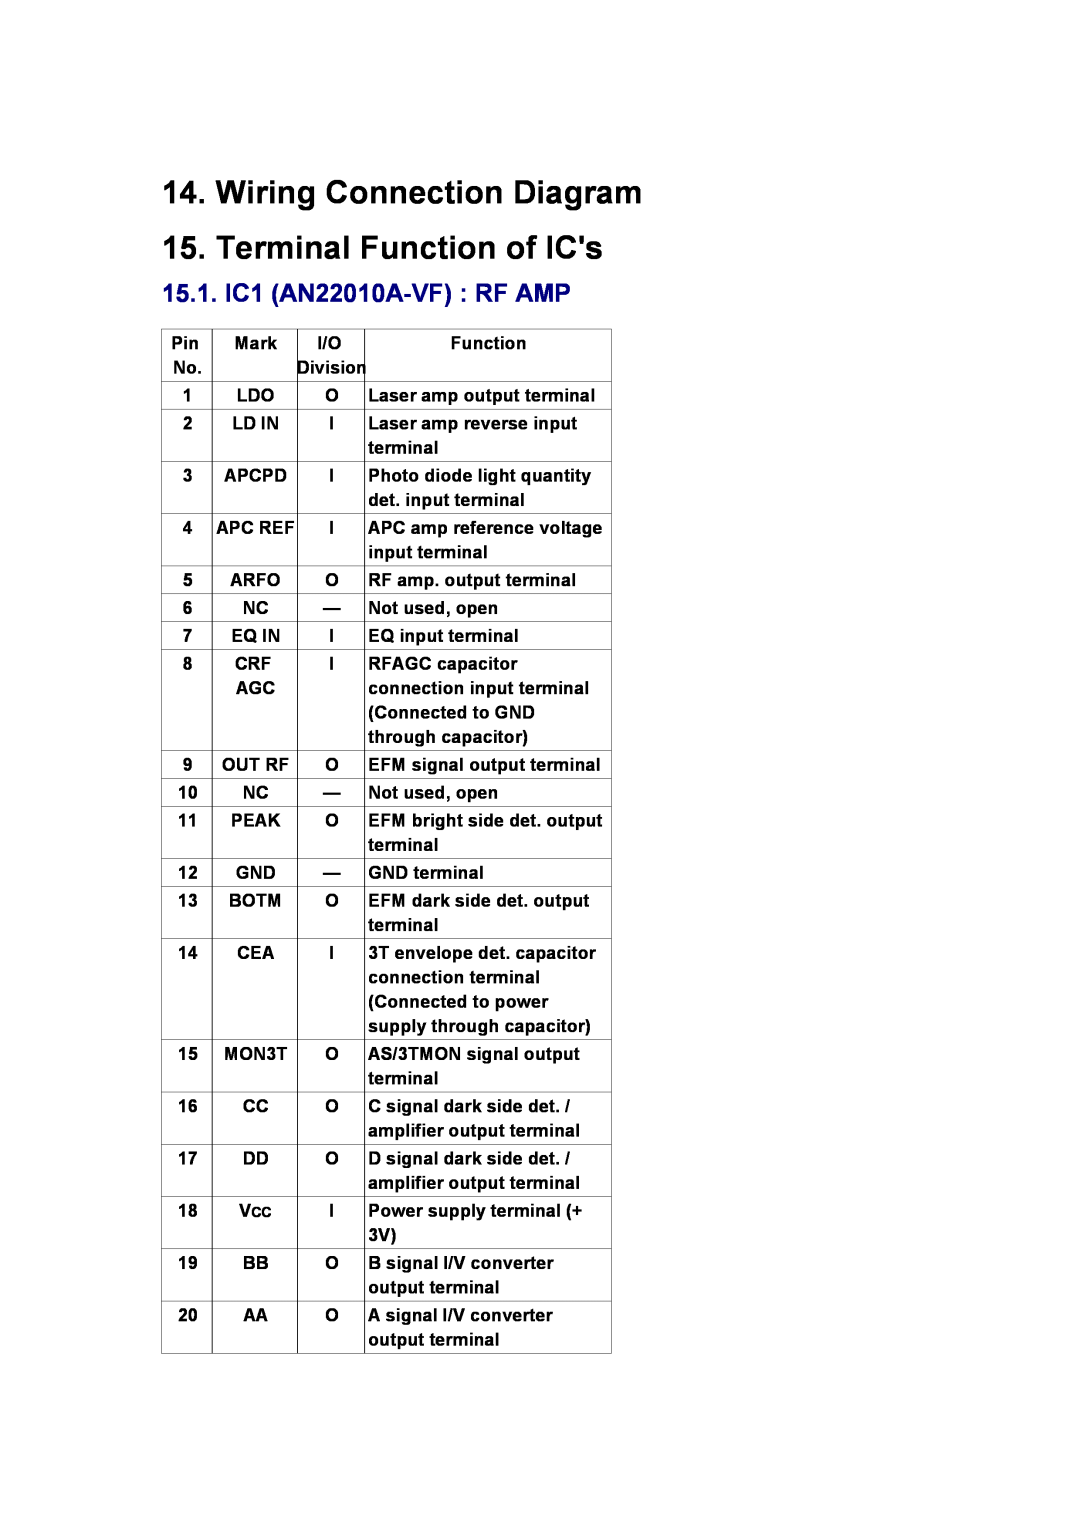 Panasonic SJ-MR230DGK specifications Wiring Connection Diagram, Terminal Function of ICs, 15.1. IC1 AN22010A-VF :RF AMP 